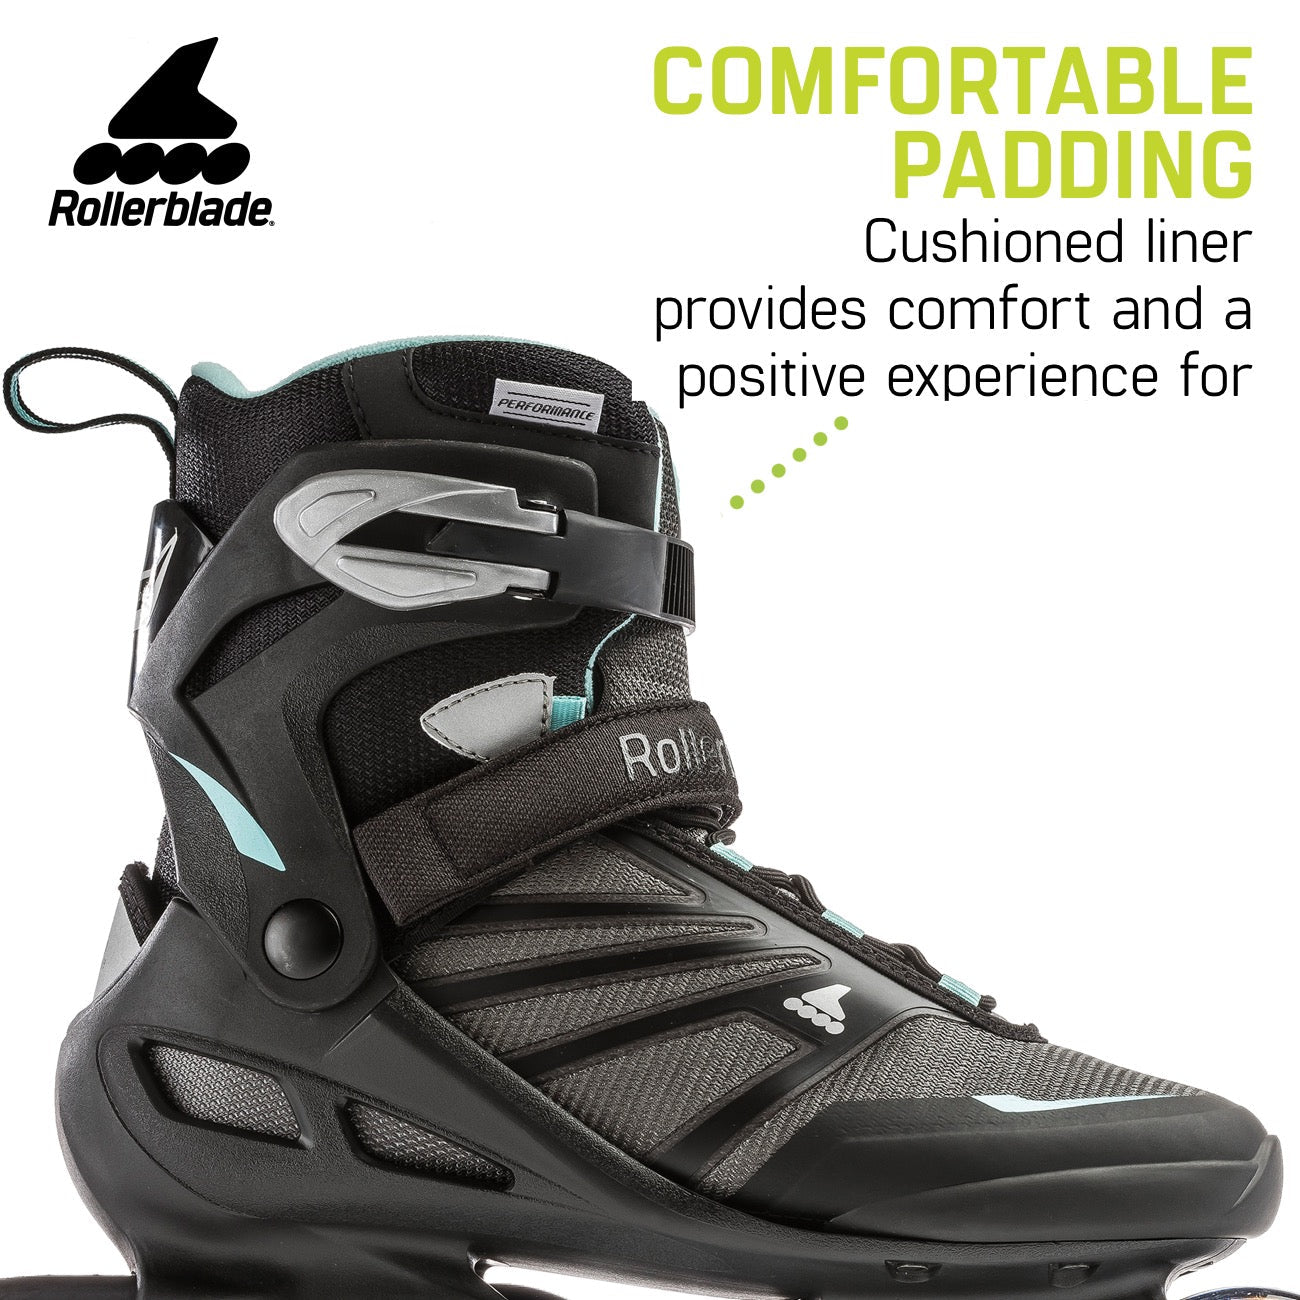 rollerblades-with-velcro-straps-buckles-instead-of-laces